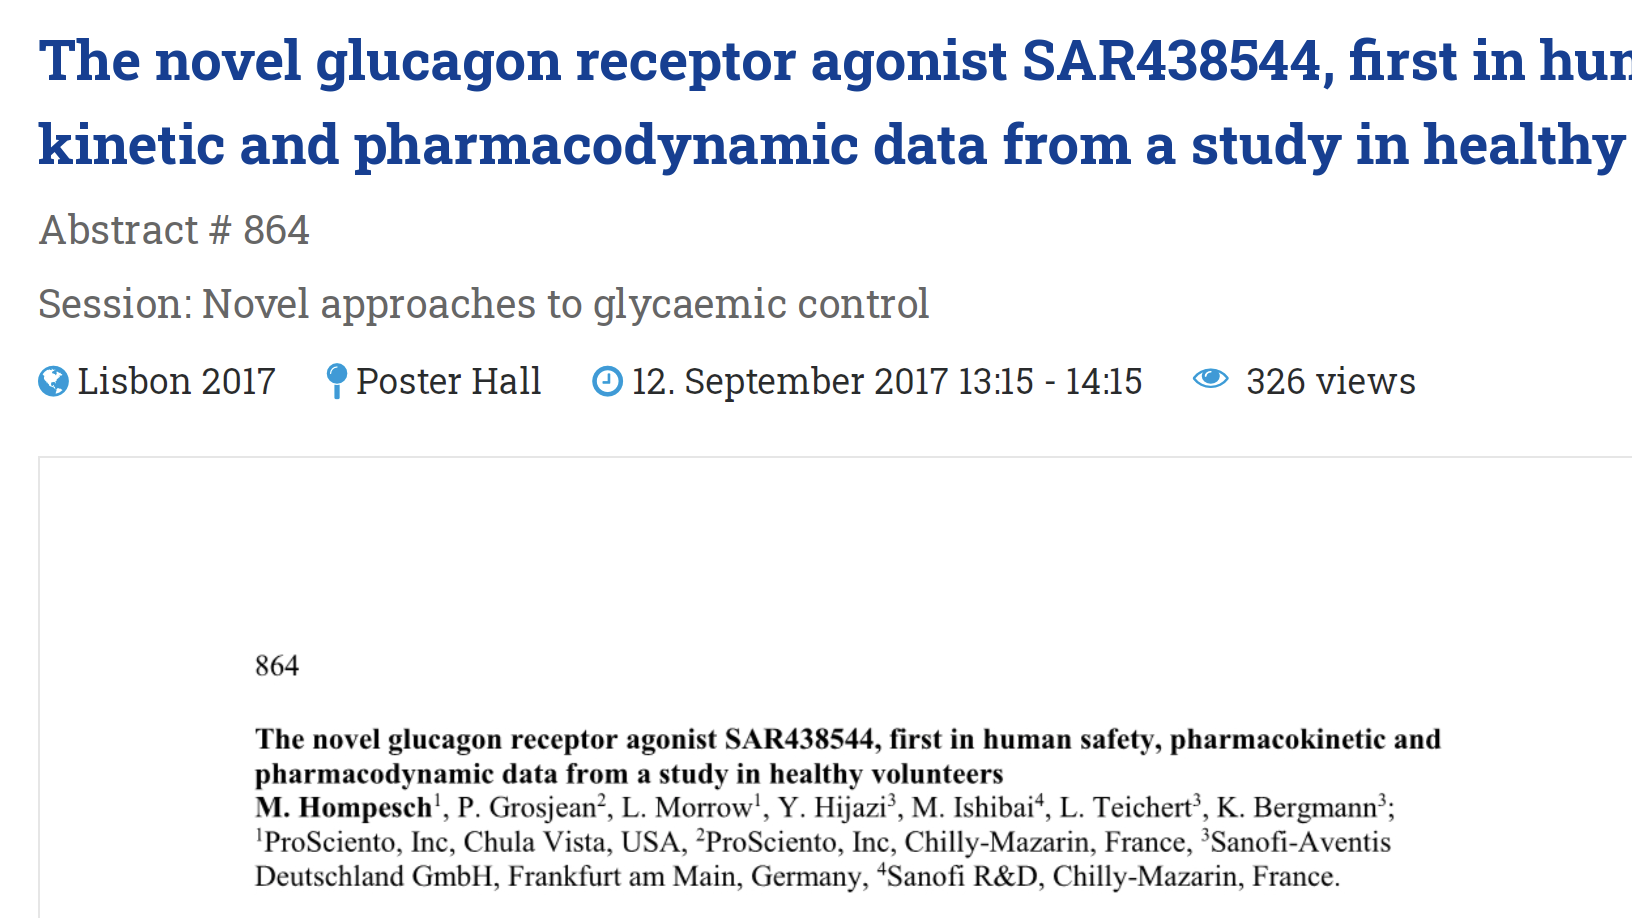 image of The novel glucagon receptor agonist SAR438544, first in human safety, pharmacokinetic and pharmacodynamic data from a study in healthy volunteers